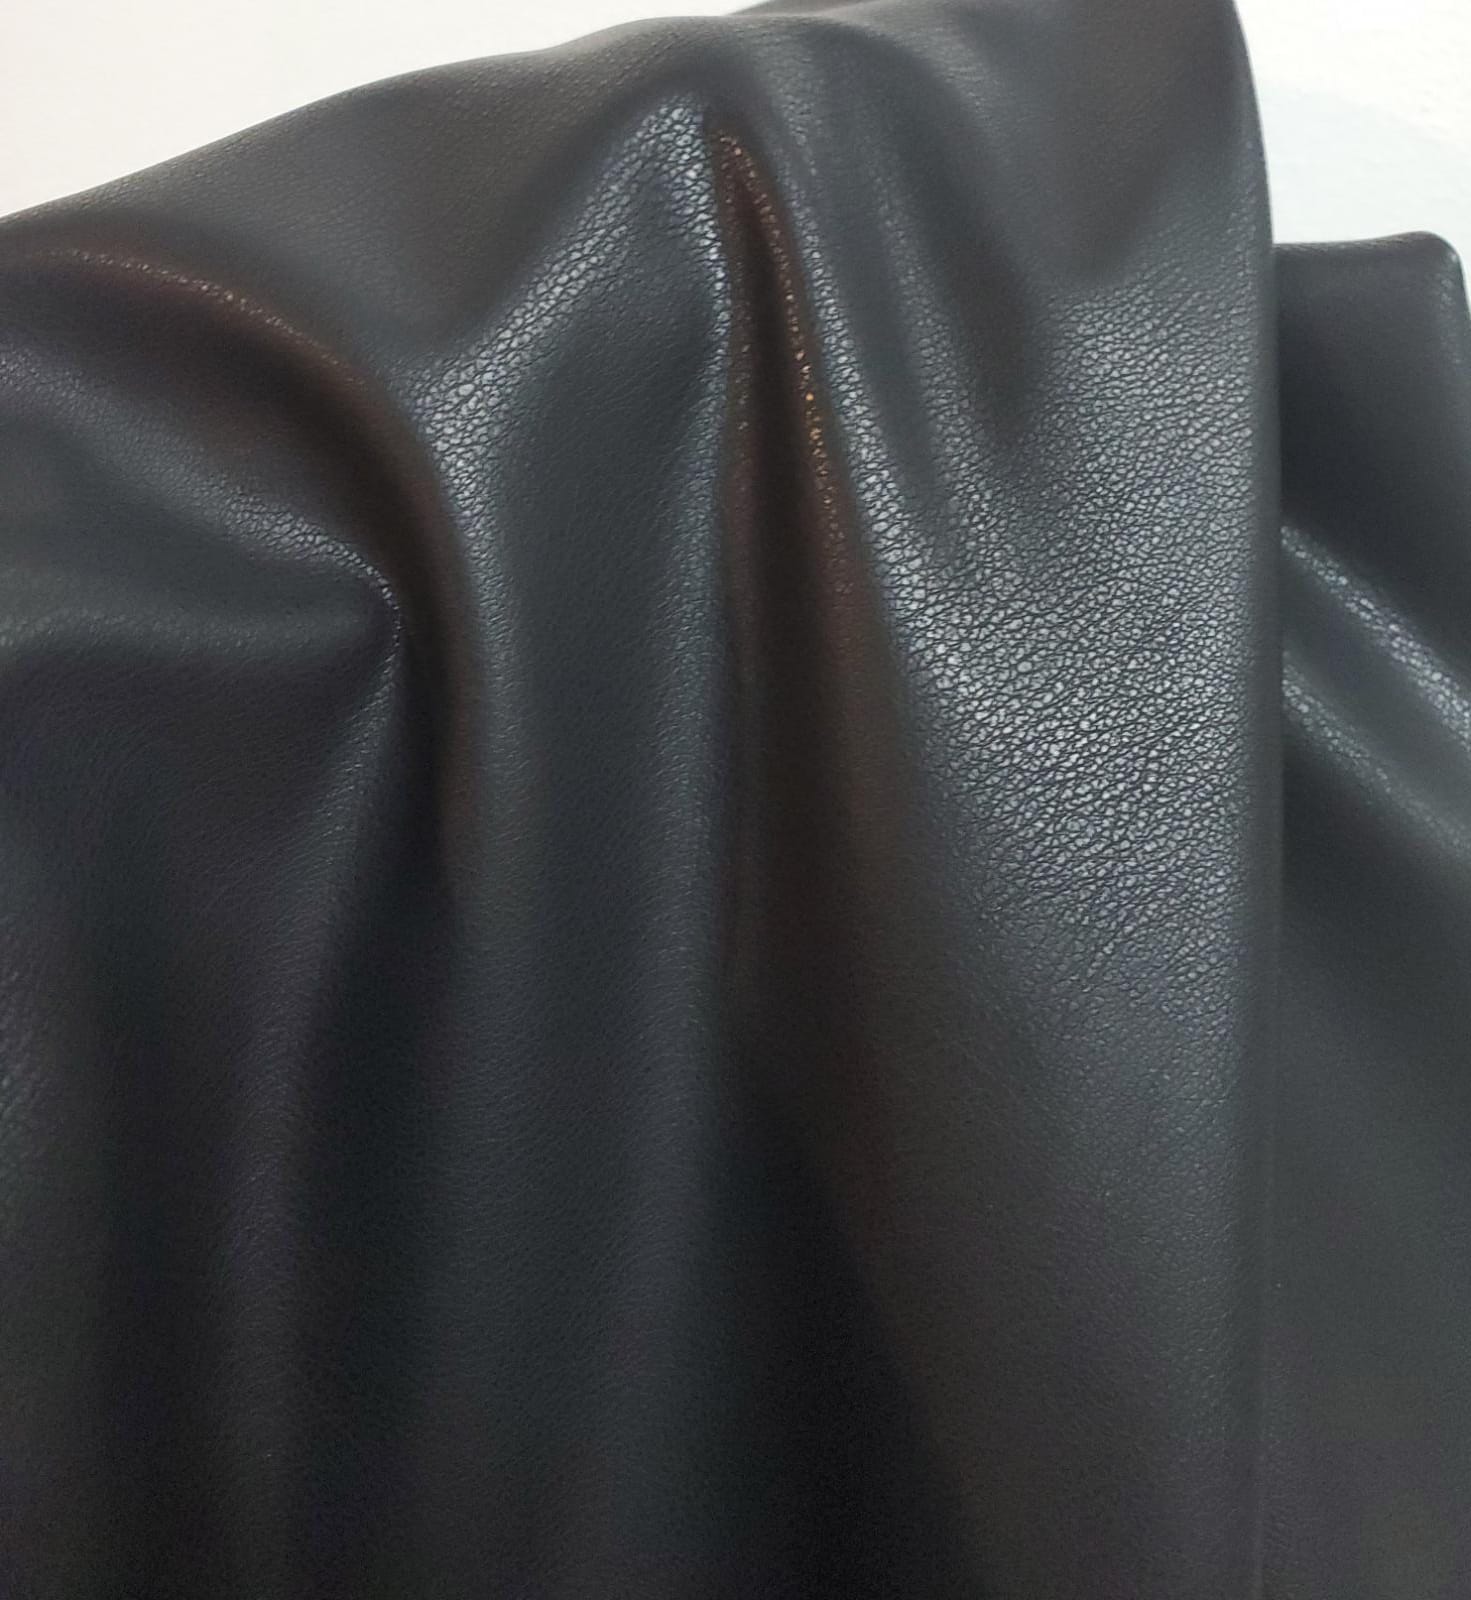  Faux vegan leather by the yard sheets distressed leather fabric for upholstery 30,000 Double Rubs vinyl sheets nappa leather crafts bookbinding books furniture fabrics uphilstery fuax material pu pleather faiux learher cruelty free nappa seat black stretch